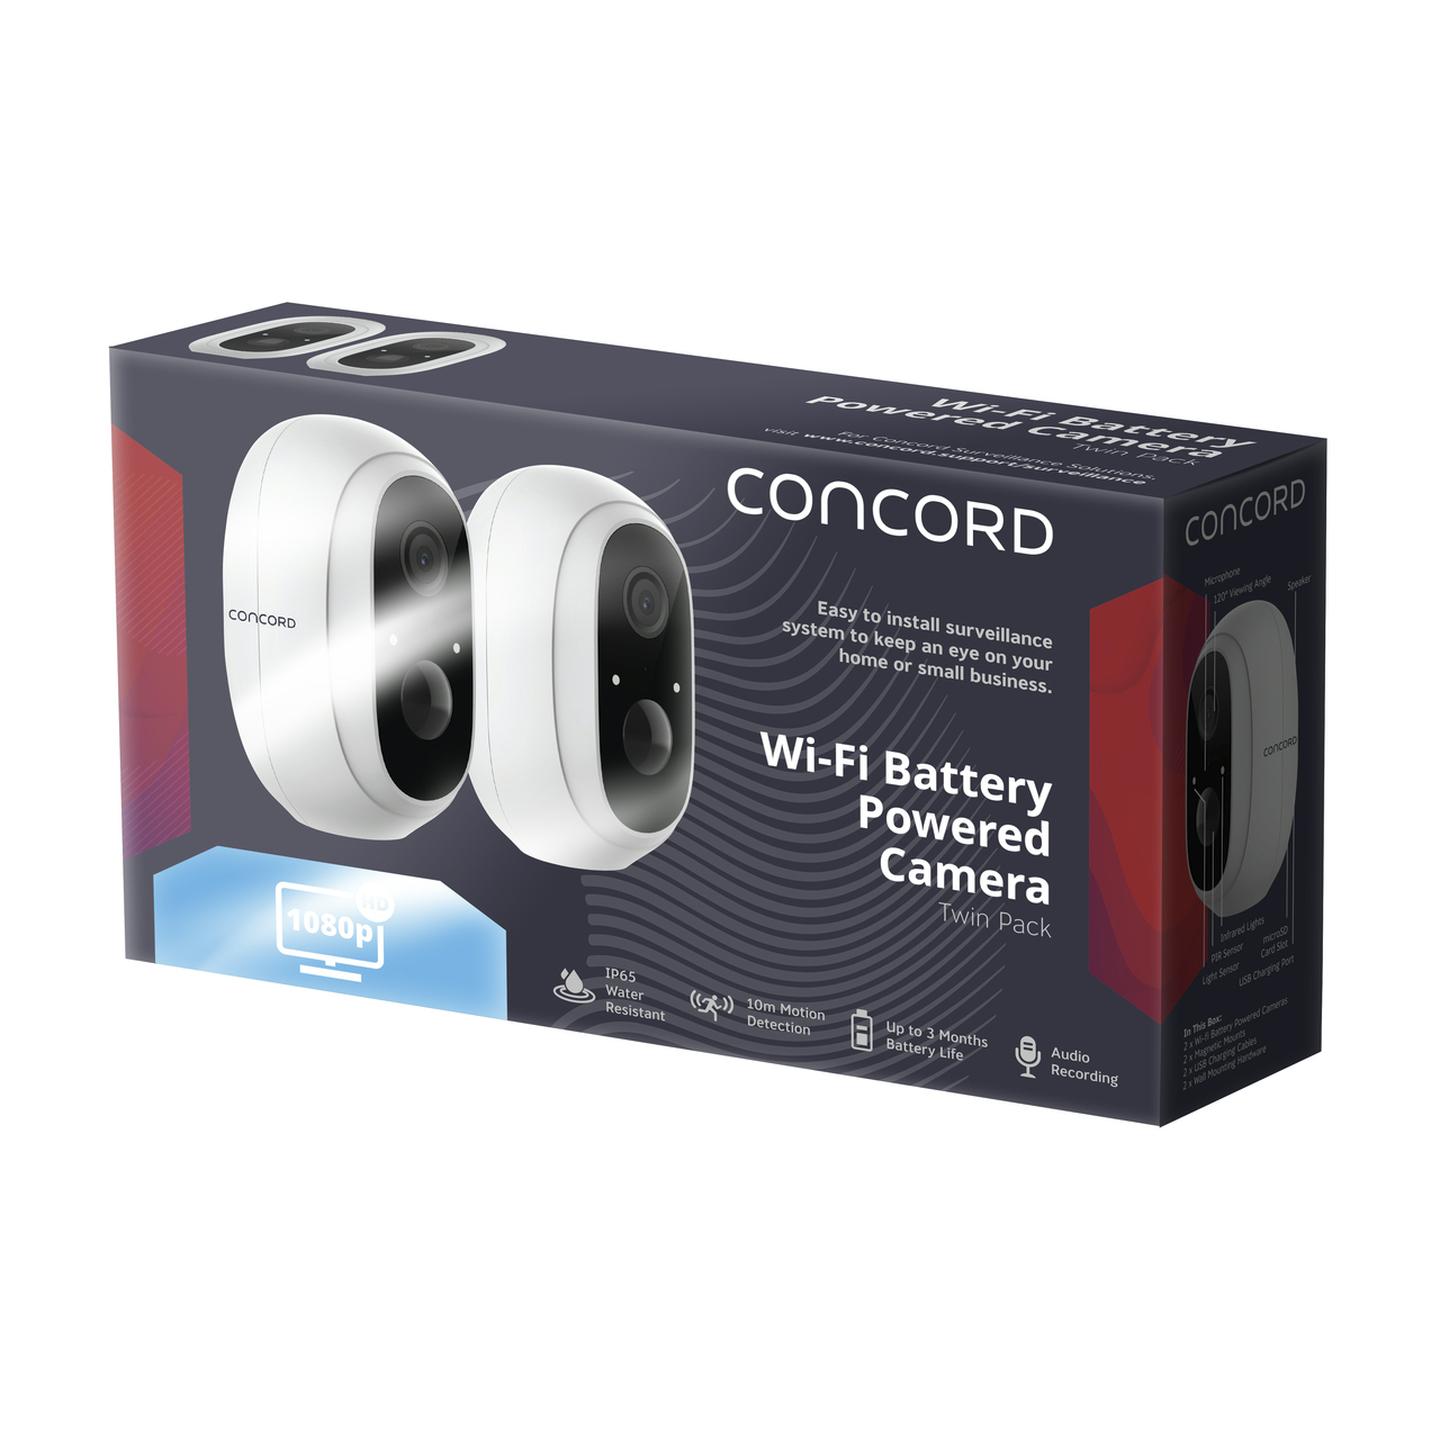 Concord Wi-Fi Battery Powered Twin Pack Cameras